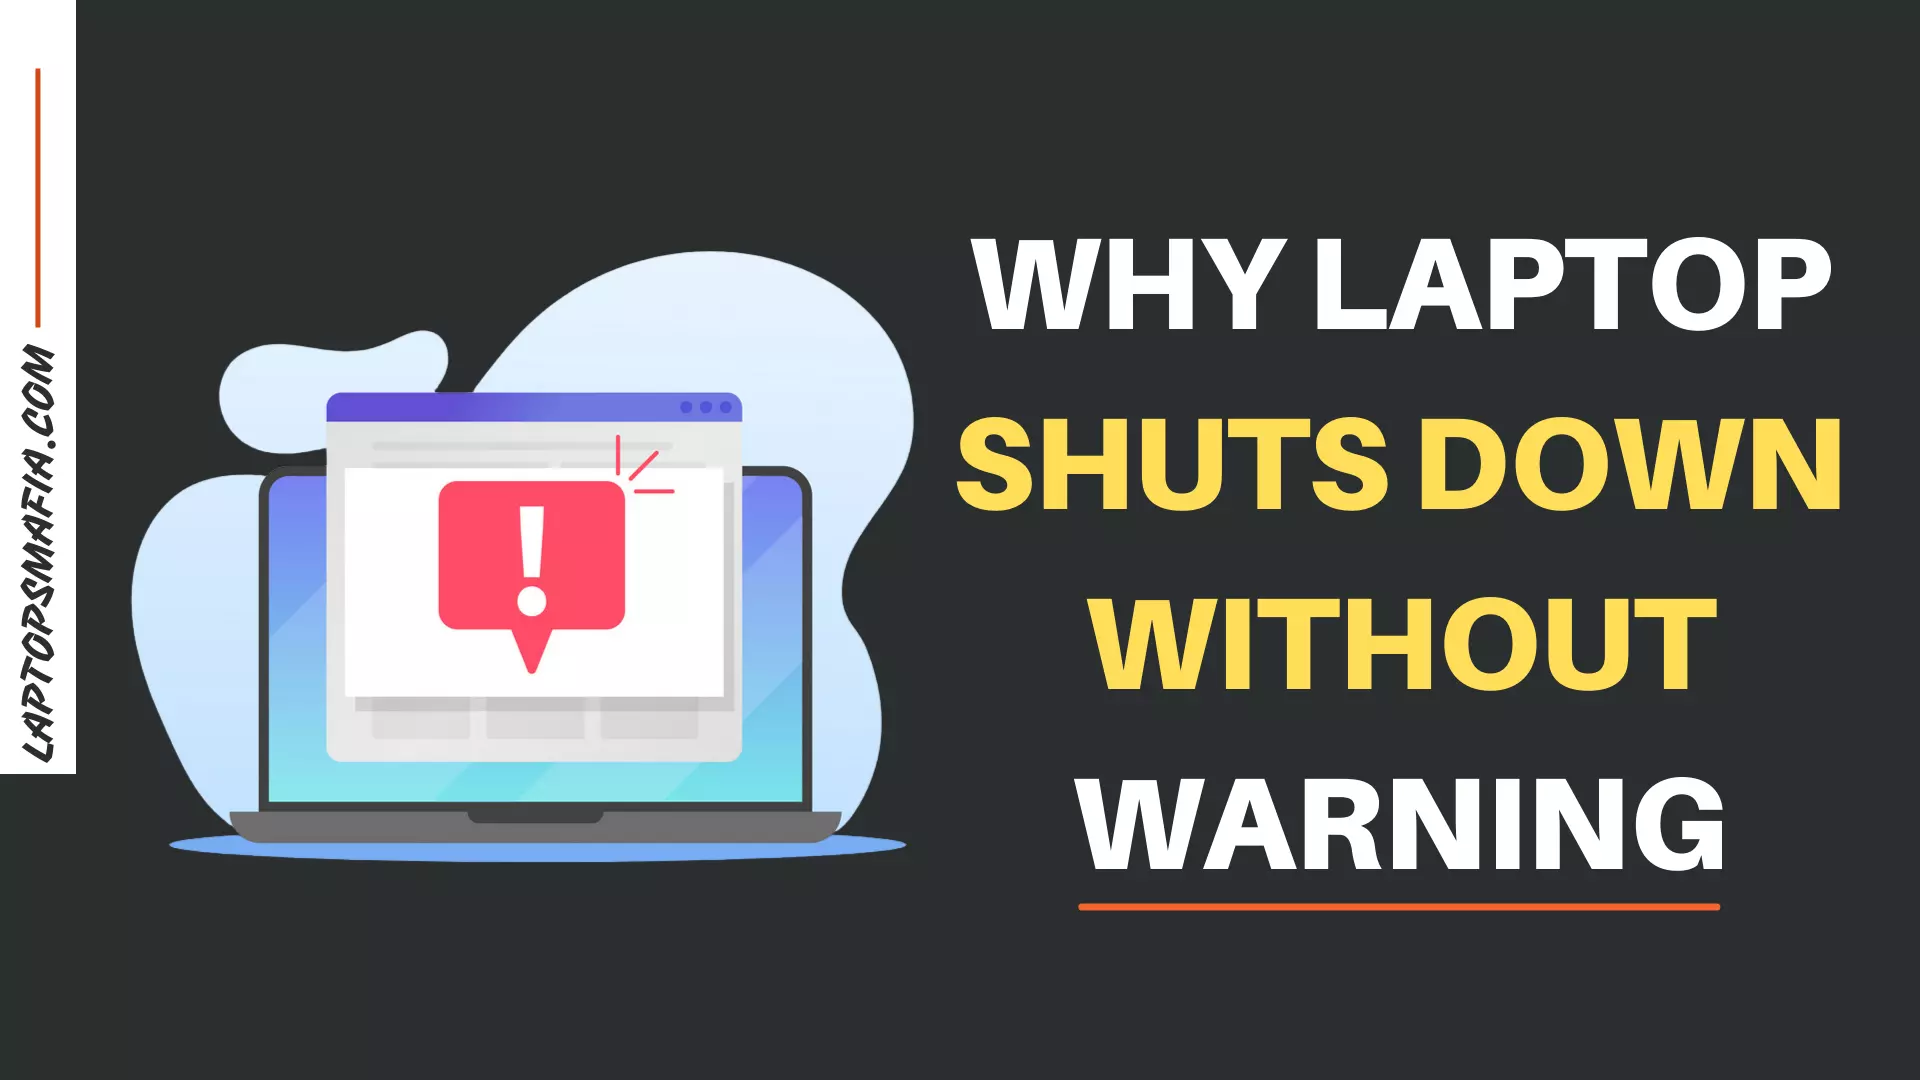 Why Laptop Shuts Down Without Warning